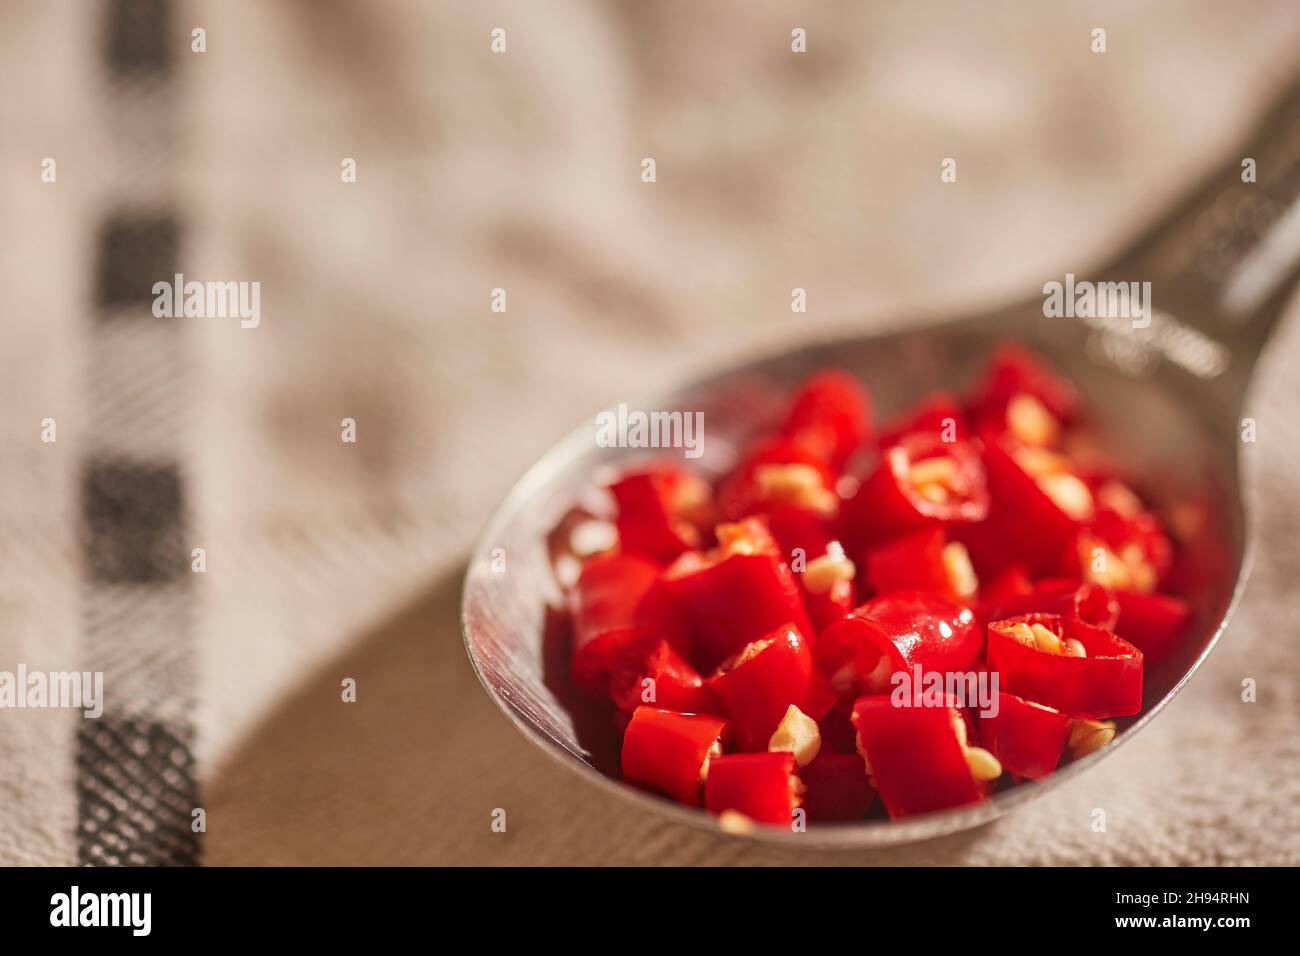 A tablespoon of chopped, fresh, Thai red chili peppers Stock Photo